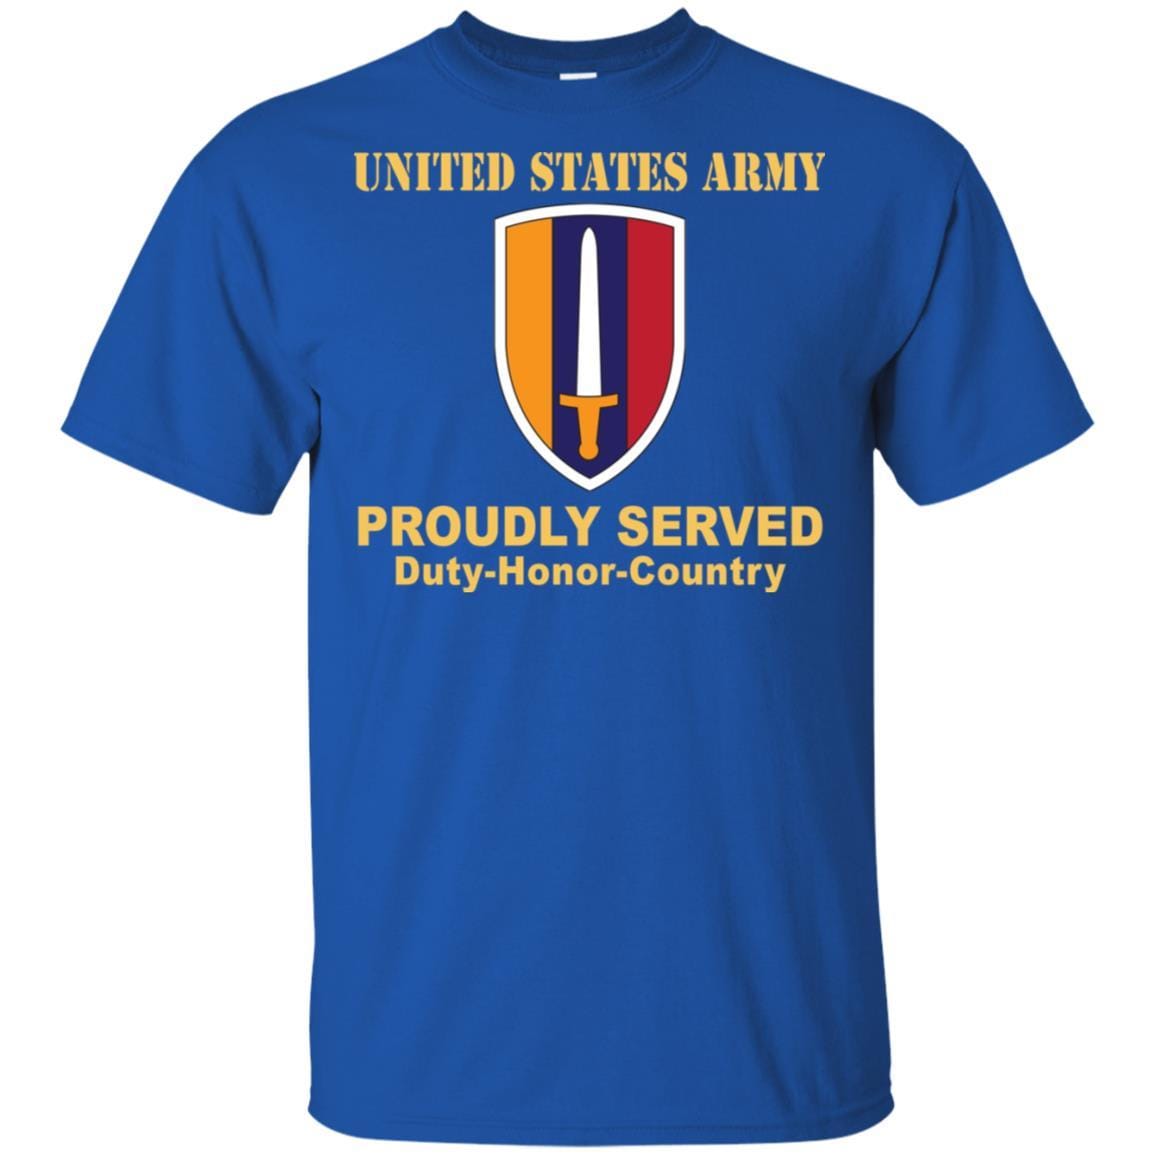 U.S. ARMY VIETNAM- Proudly Served T-Shirt On Front For Men-TShirt-Army-Veterans Nation